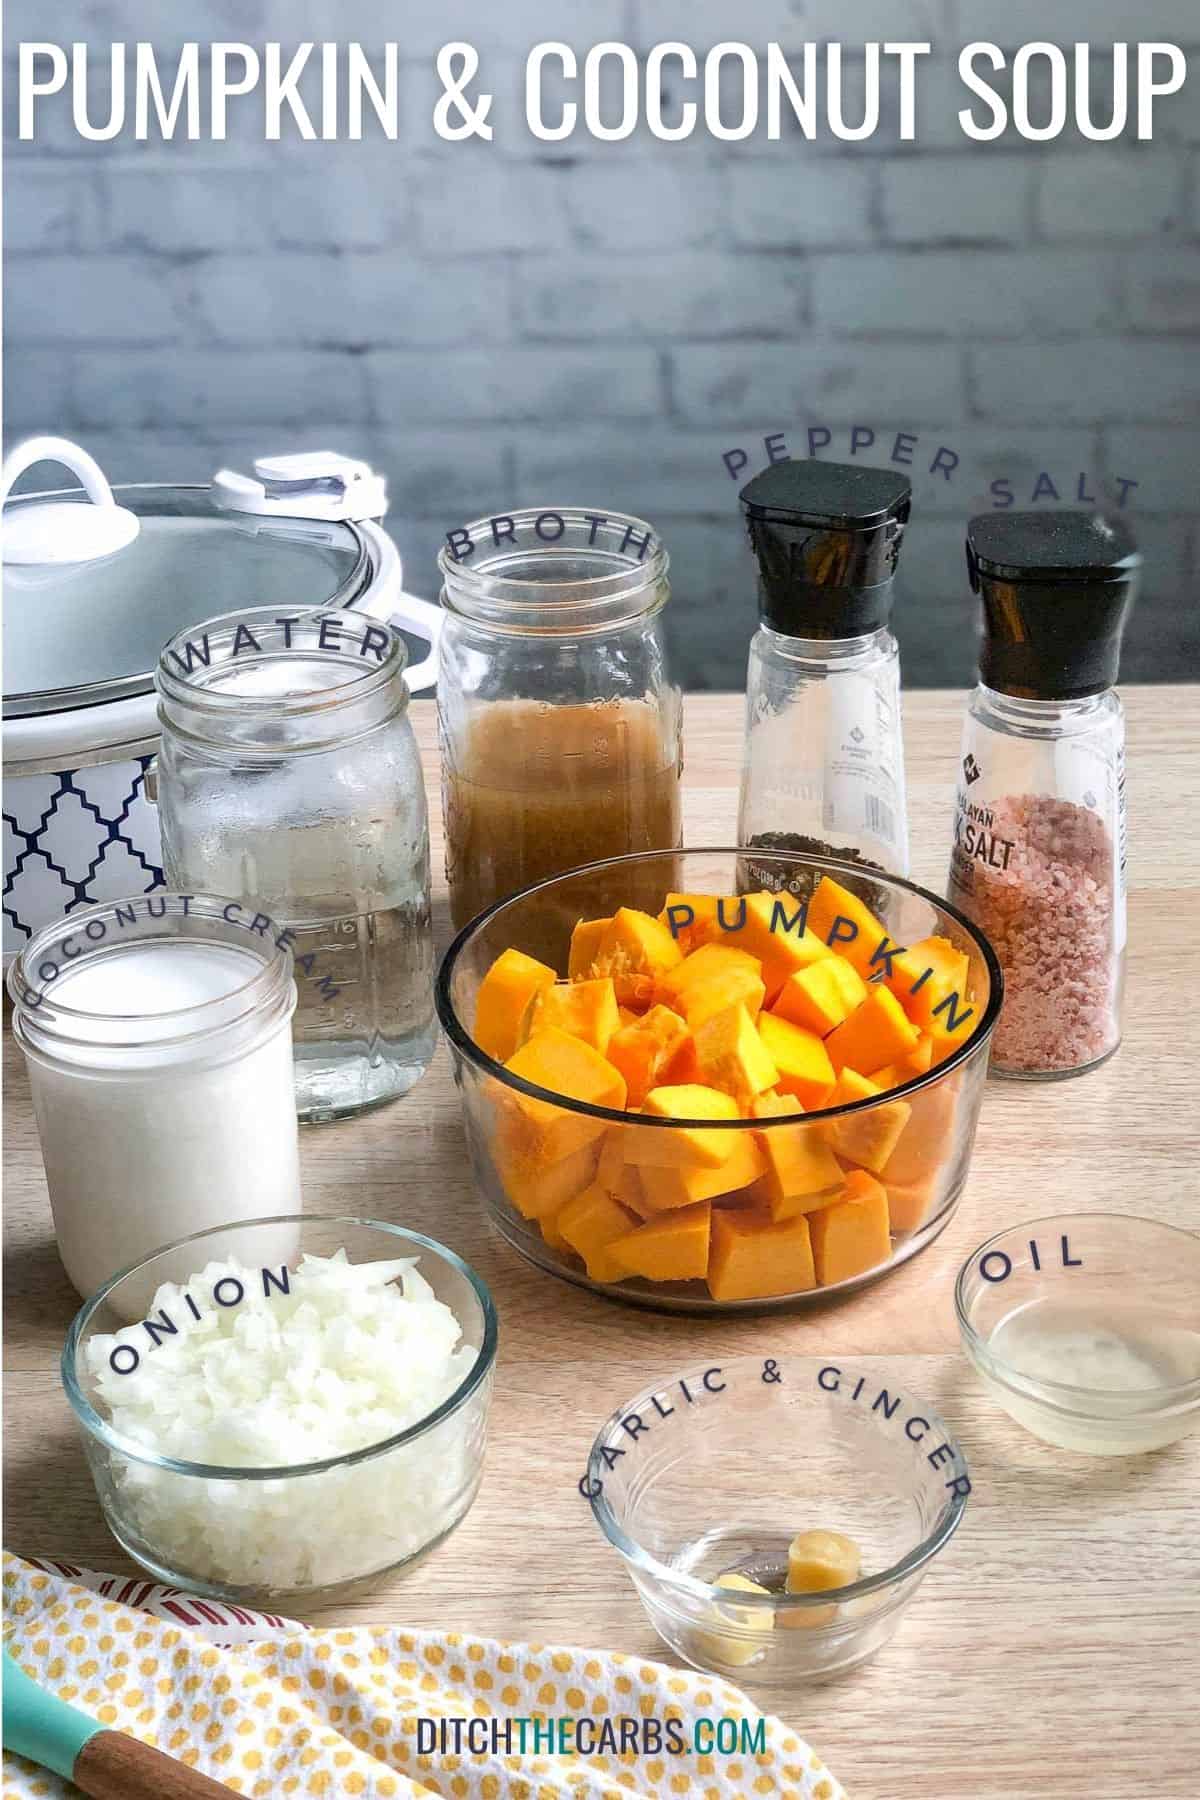 ingredients needed for pumpkin and coconut soup